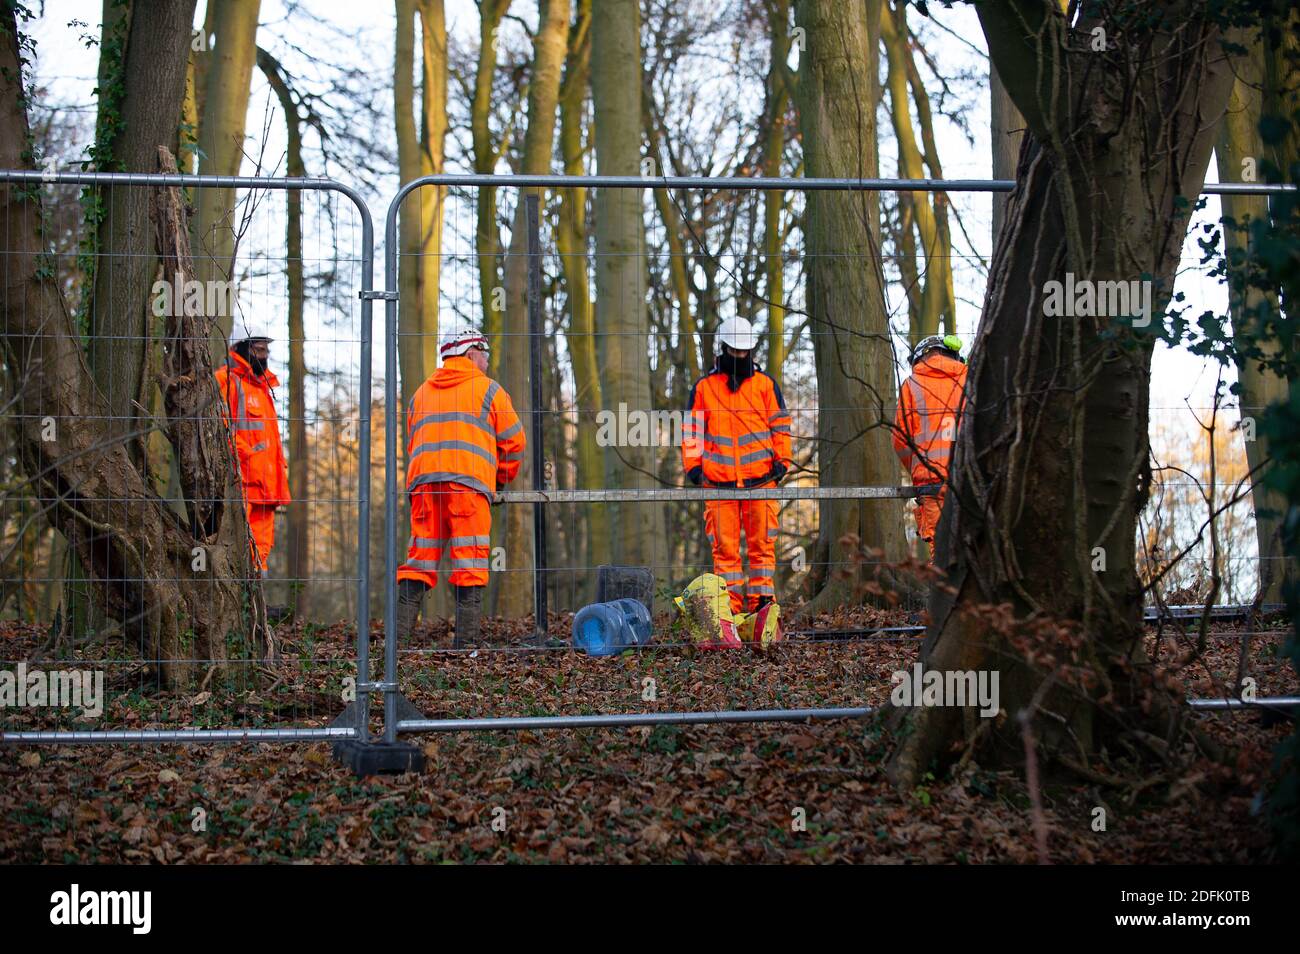 Wendover, Buckinghamshire, UK. 1st December, 2020. HS2 contractors putting up a high security fence in woodlands in Wendover that they have compulsorily purchased. HS2 workers were filling the post holes in the woodland floor with concrete. The controversial HS2 project puts 693 wildlife sites, 33 SSSIs and 108 ancient woodlands at risk. Credit: Maureen McLean/Alamy Stock Photo